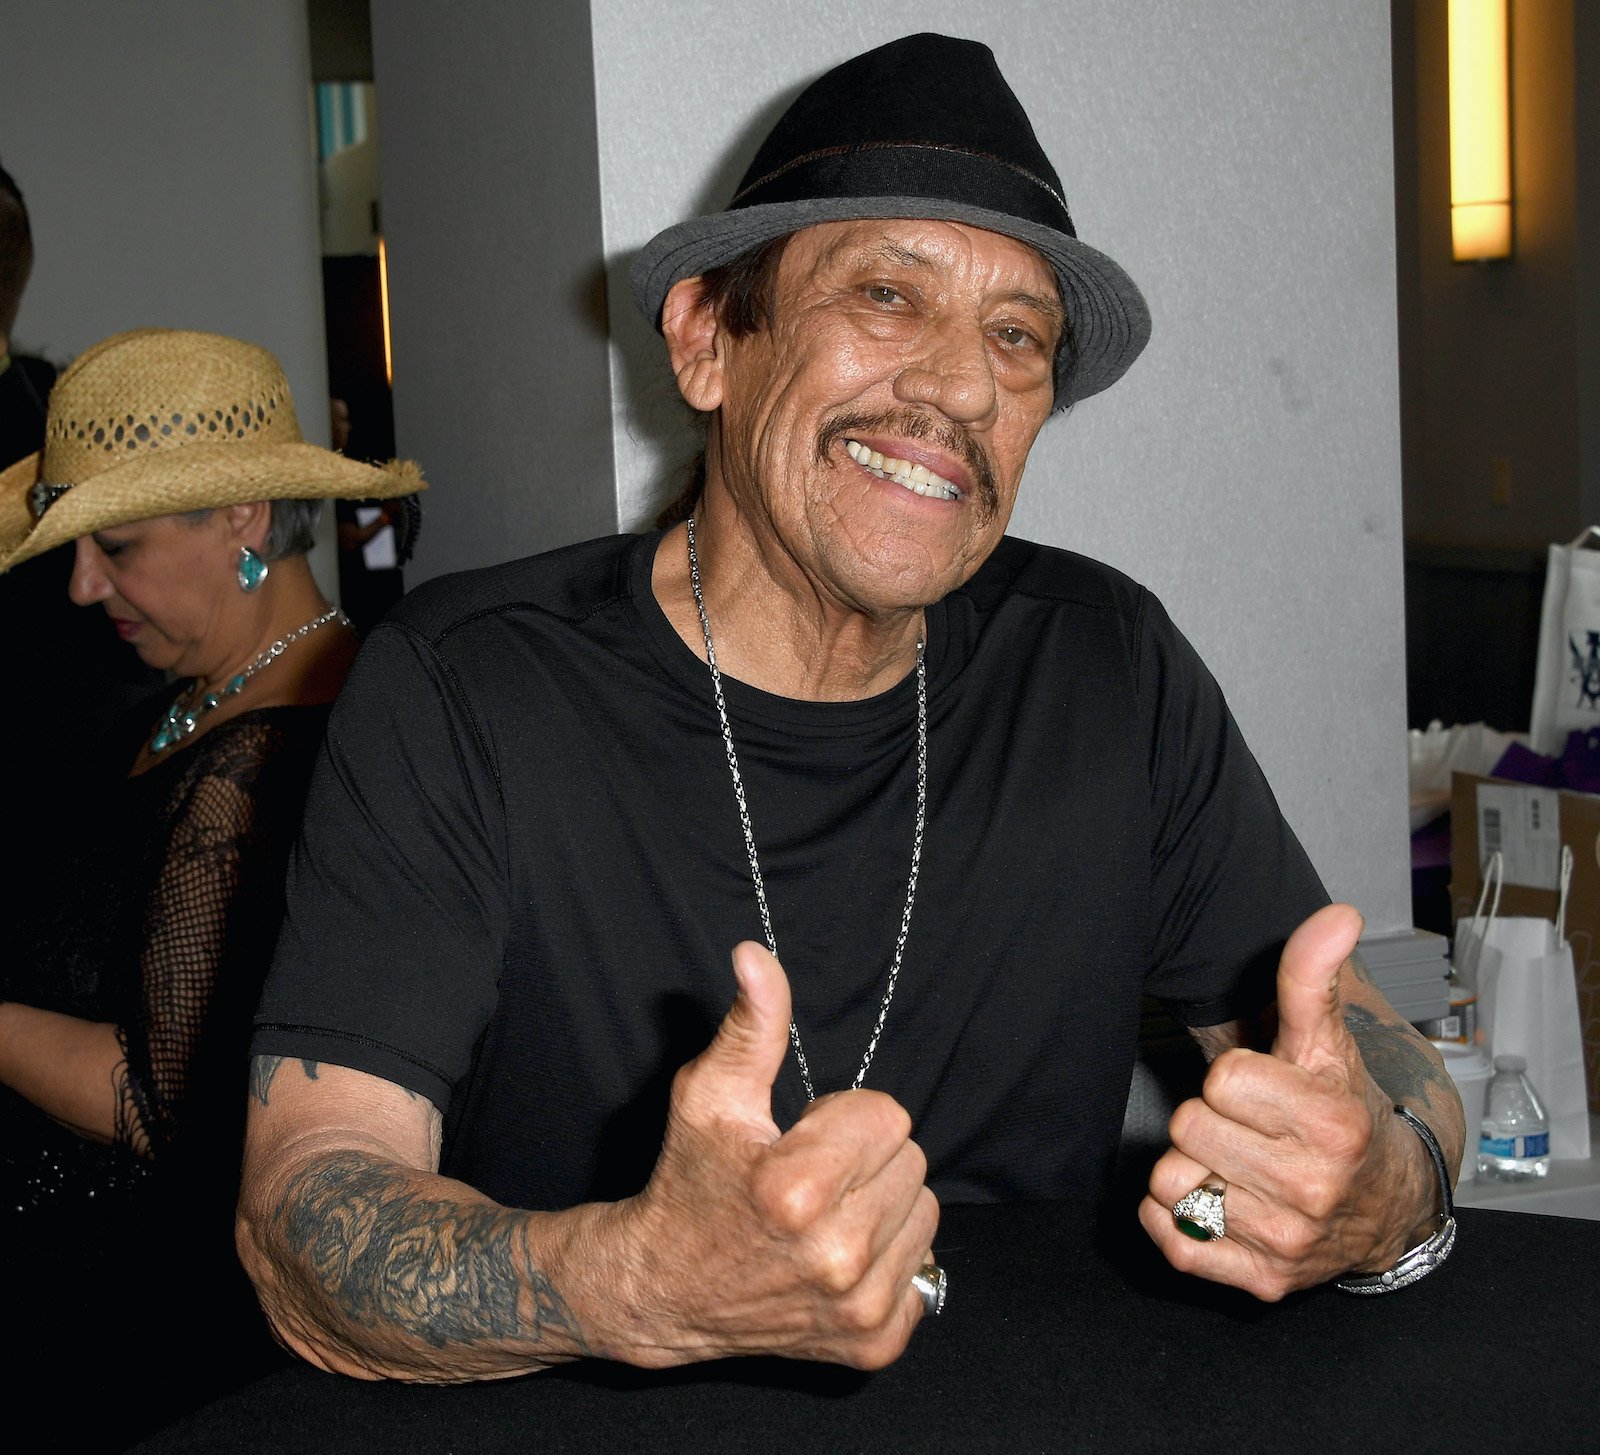 Danny Trejo attended The Hollywood Show and gives the camera the two thumbs up